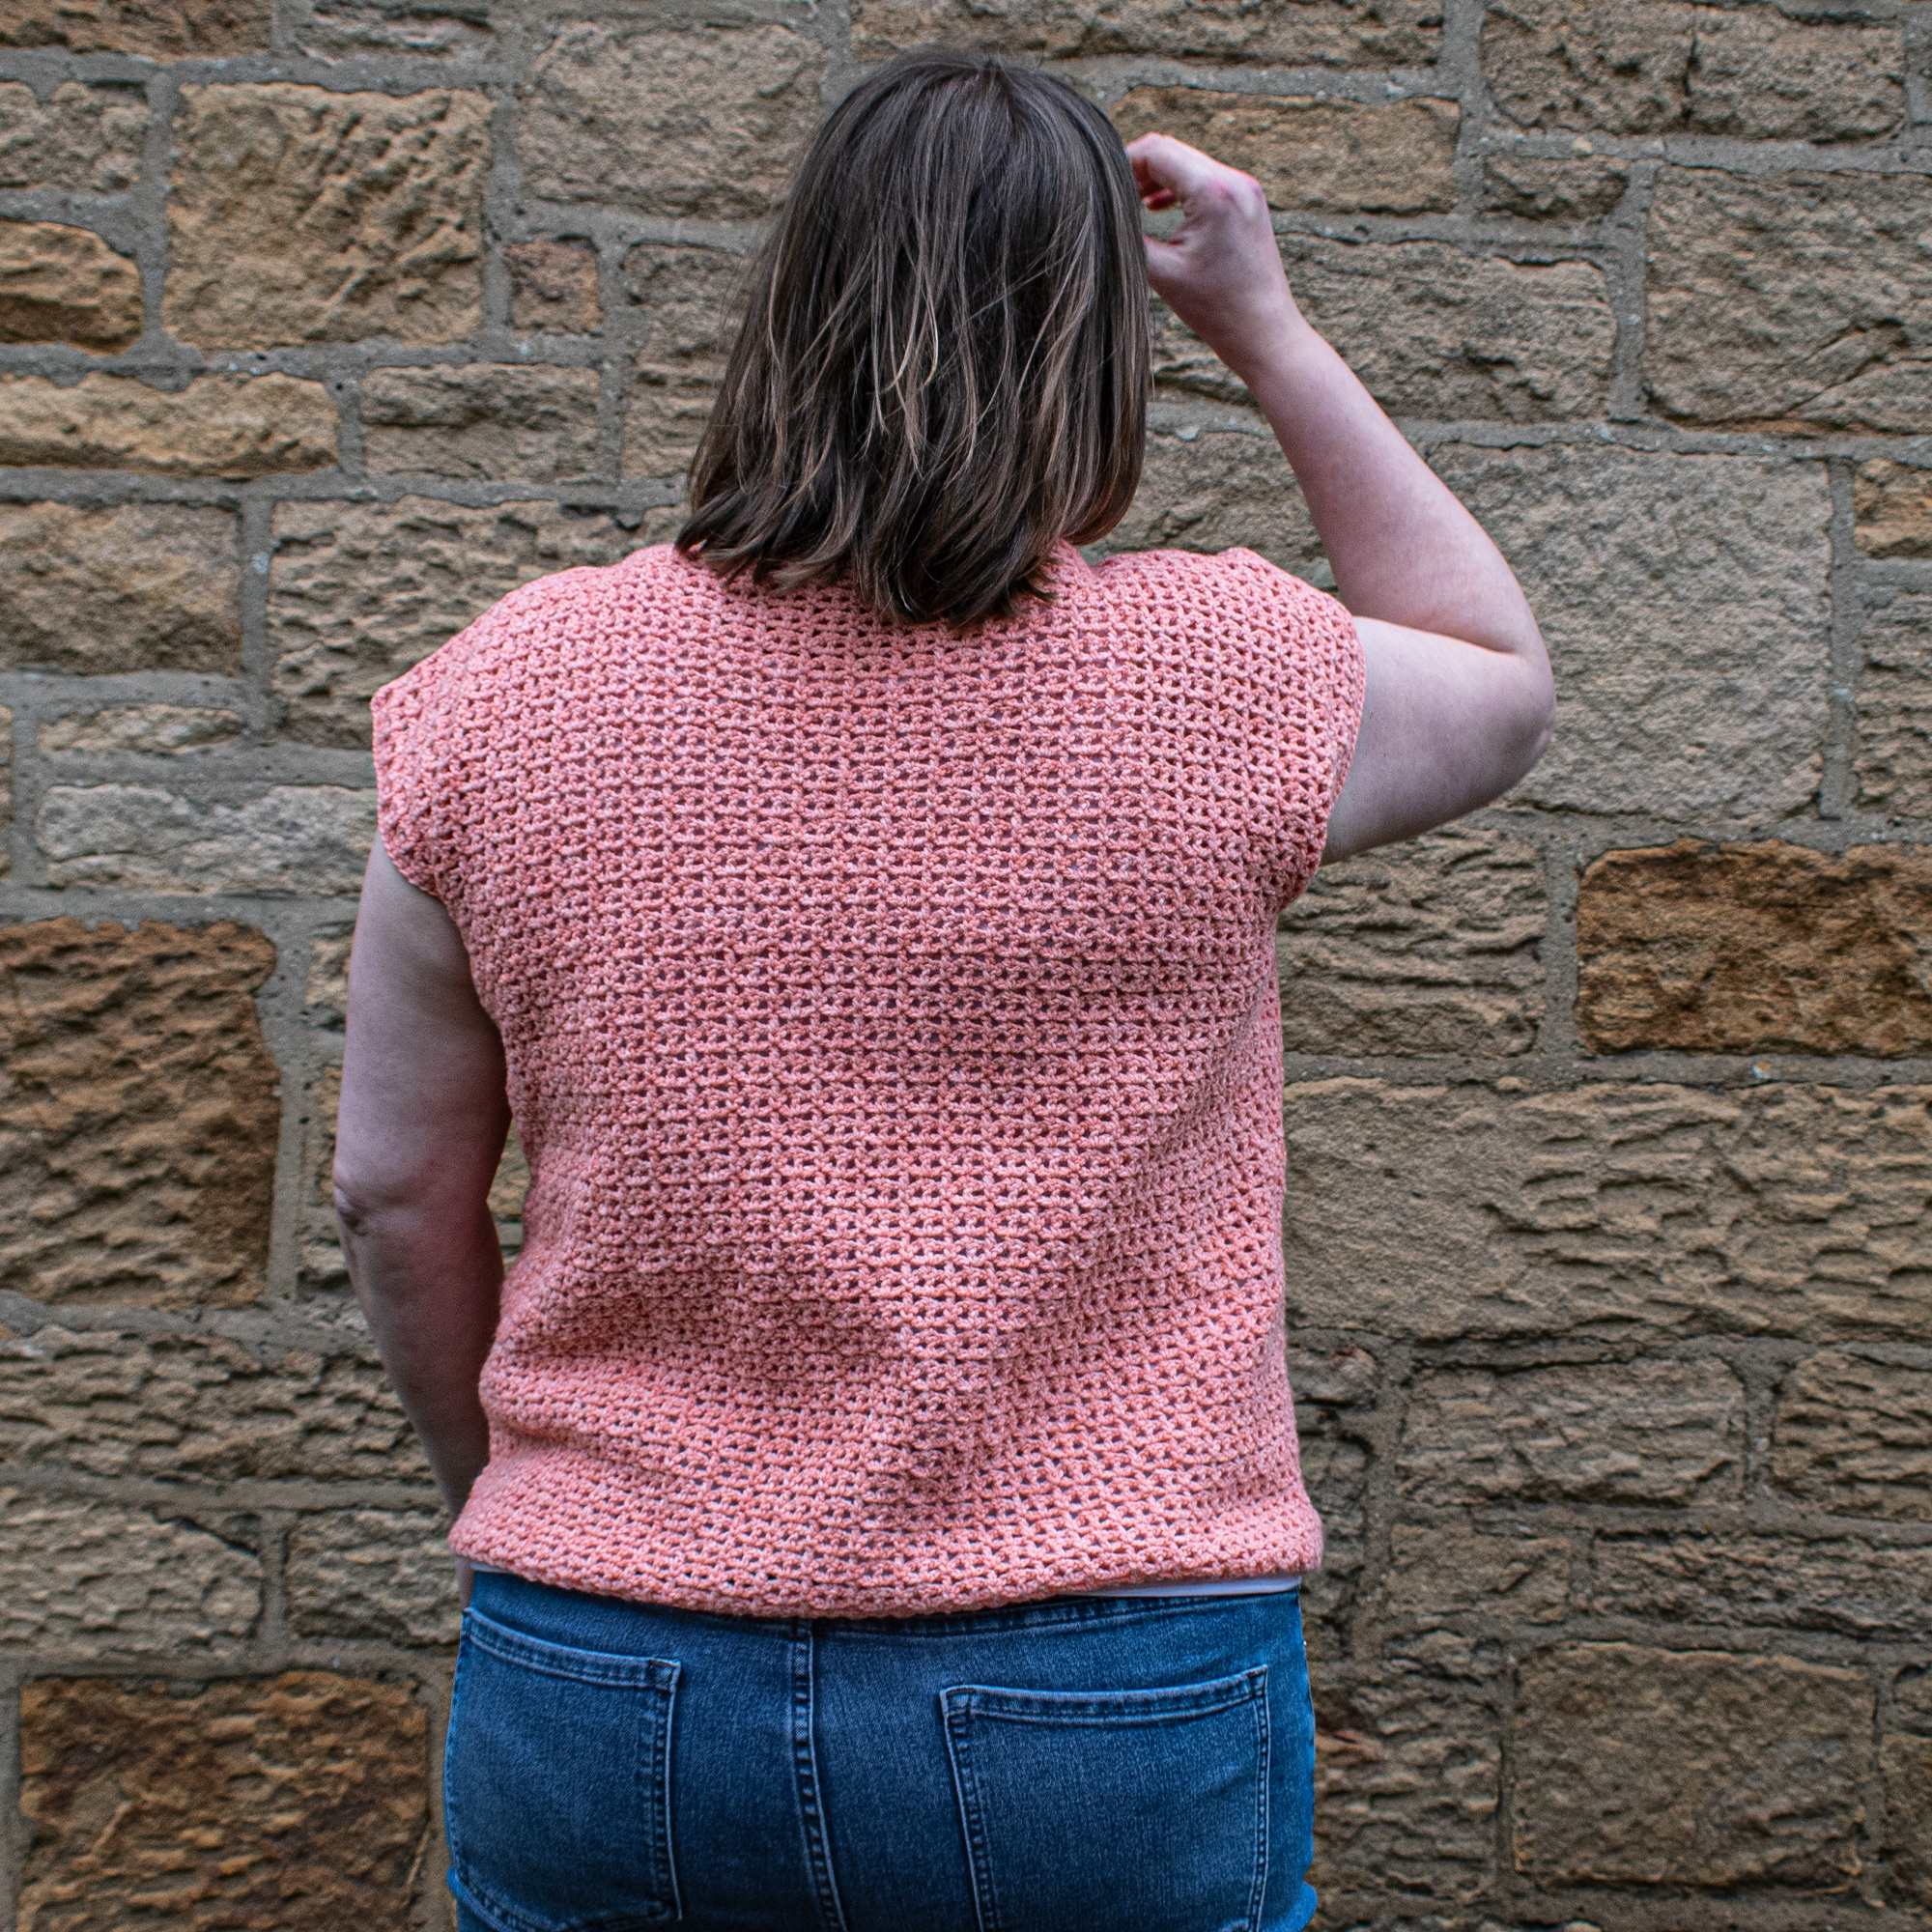 The back of this women lacy tee crochet pattern looks just as good as the front